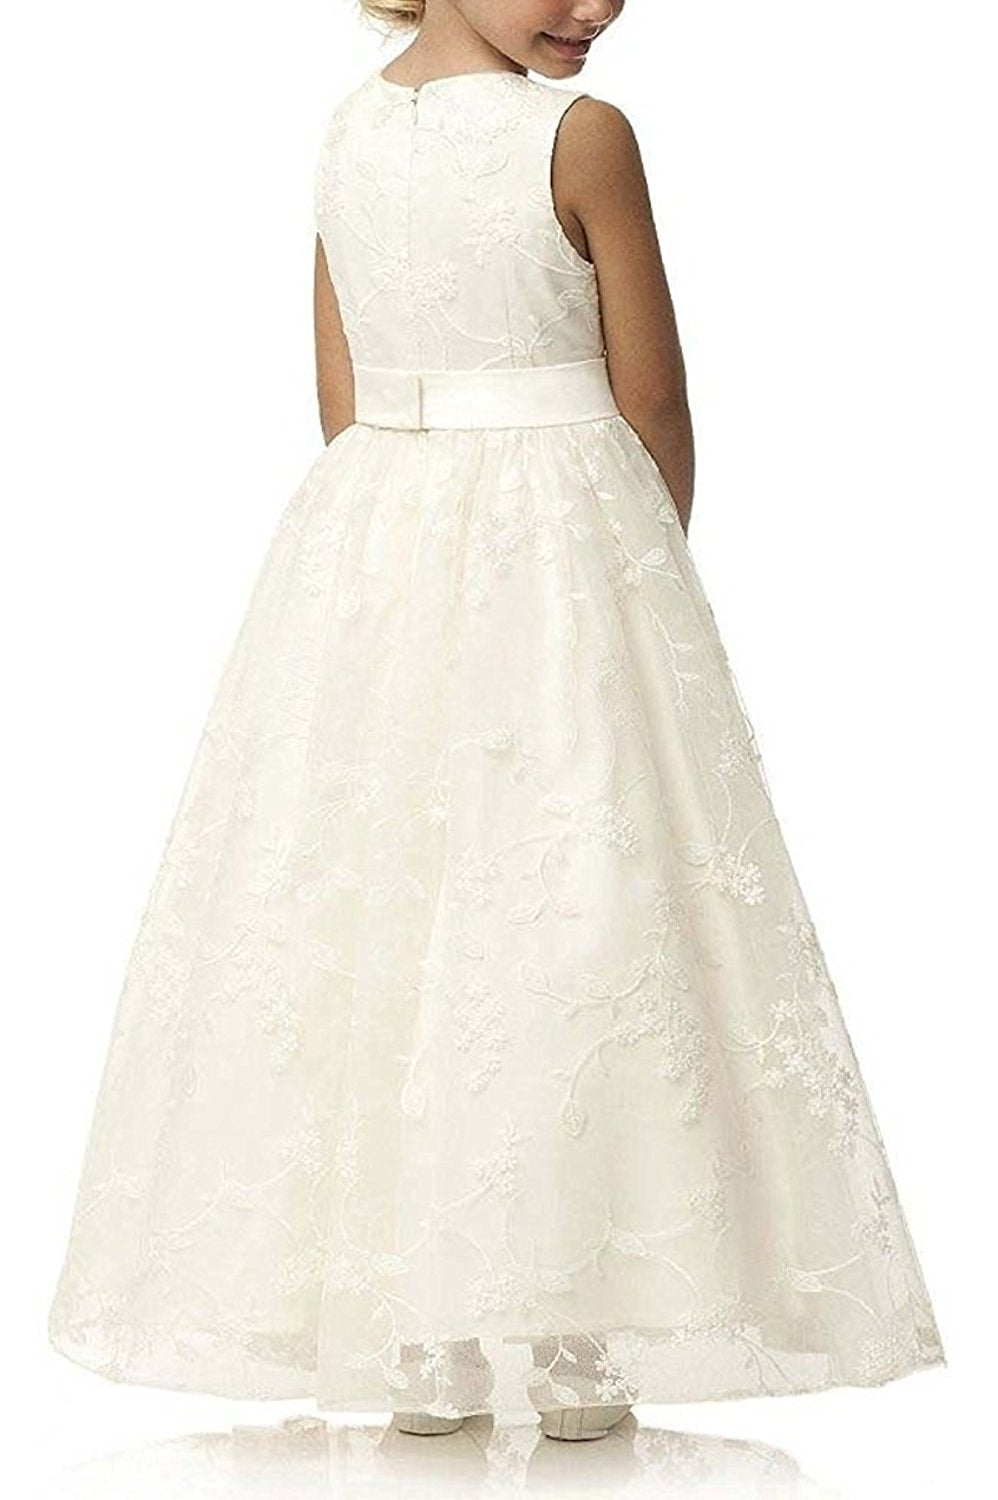 AbaoWedding A line Wedding Pageant Lace Flower Girl Dress with Belt 2-12 Year Old